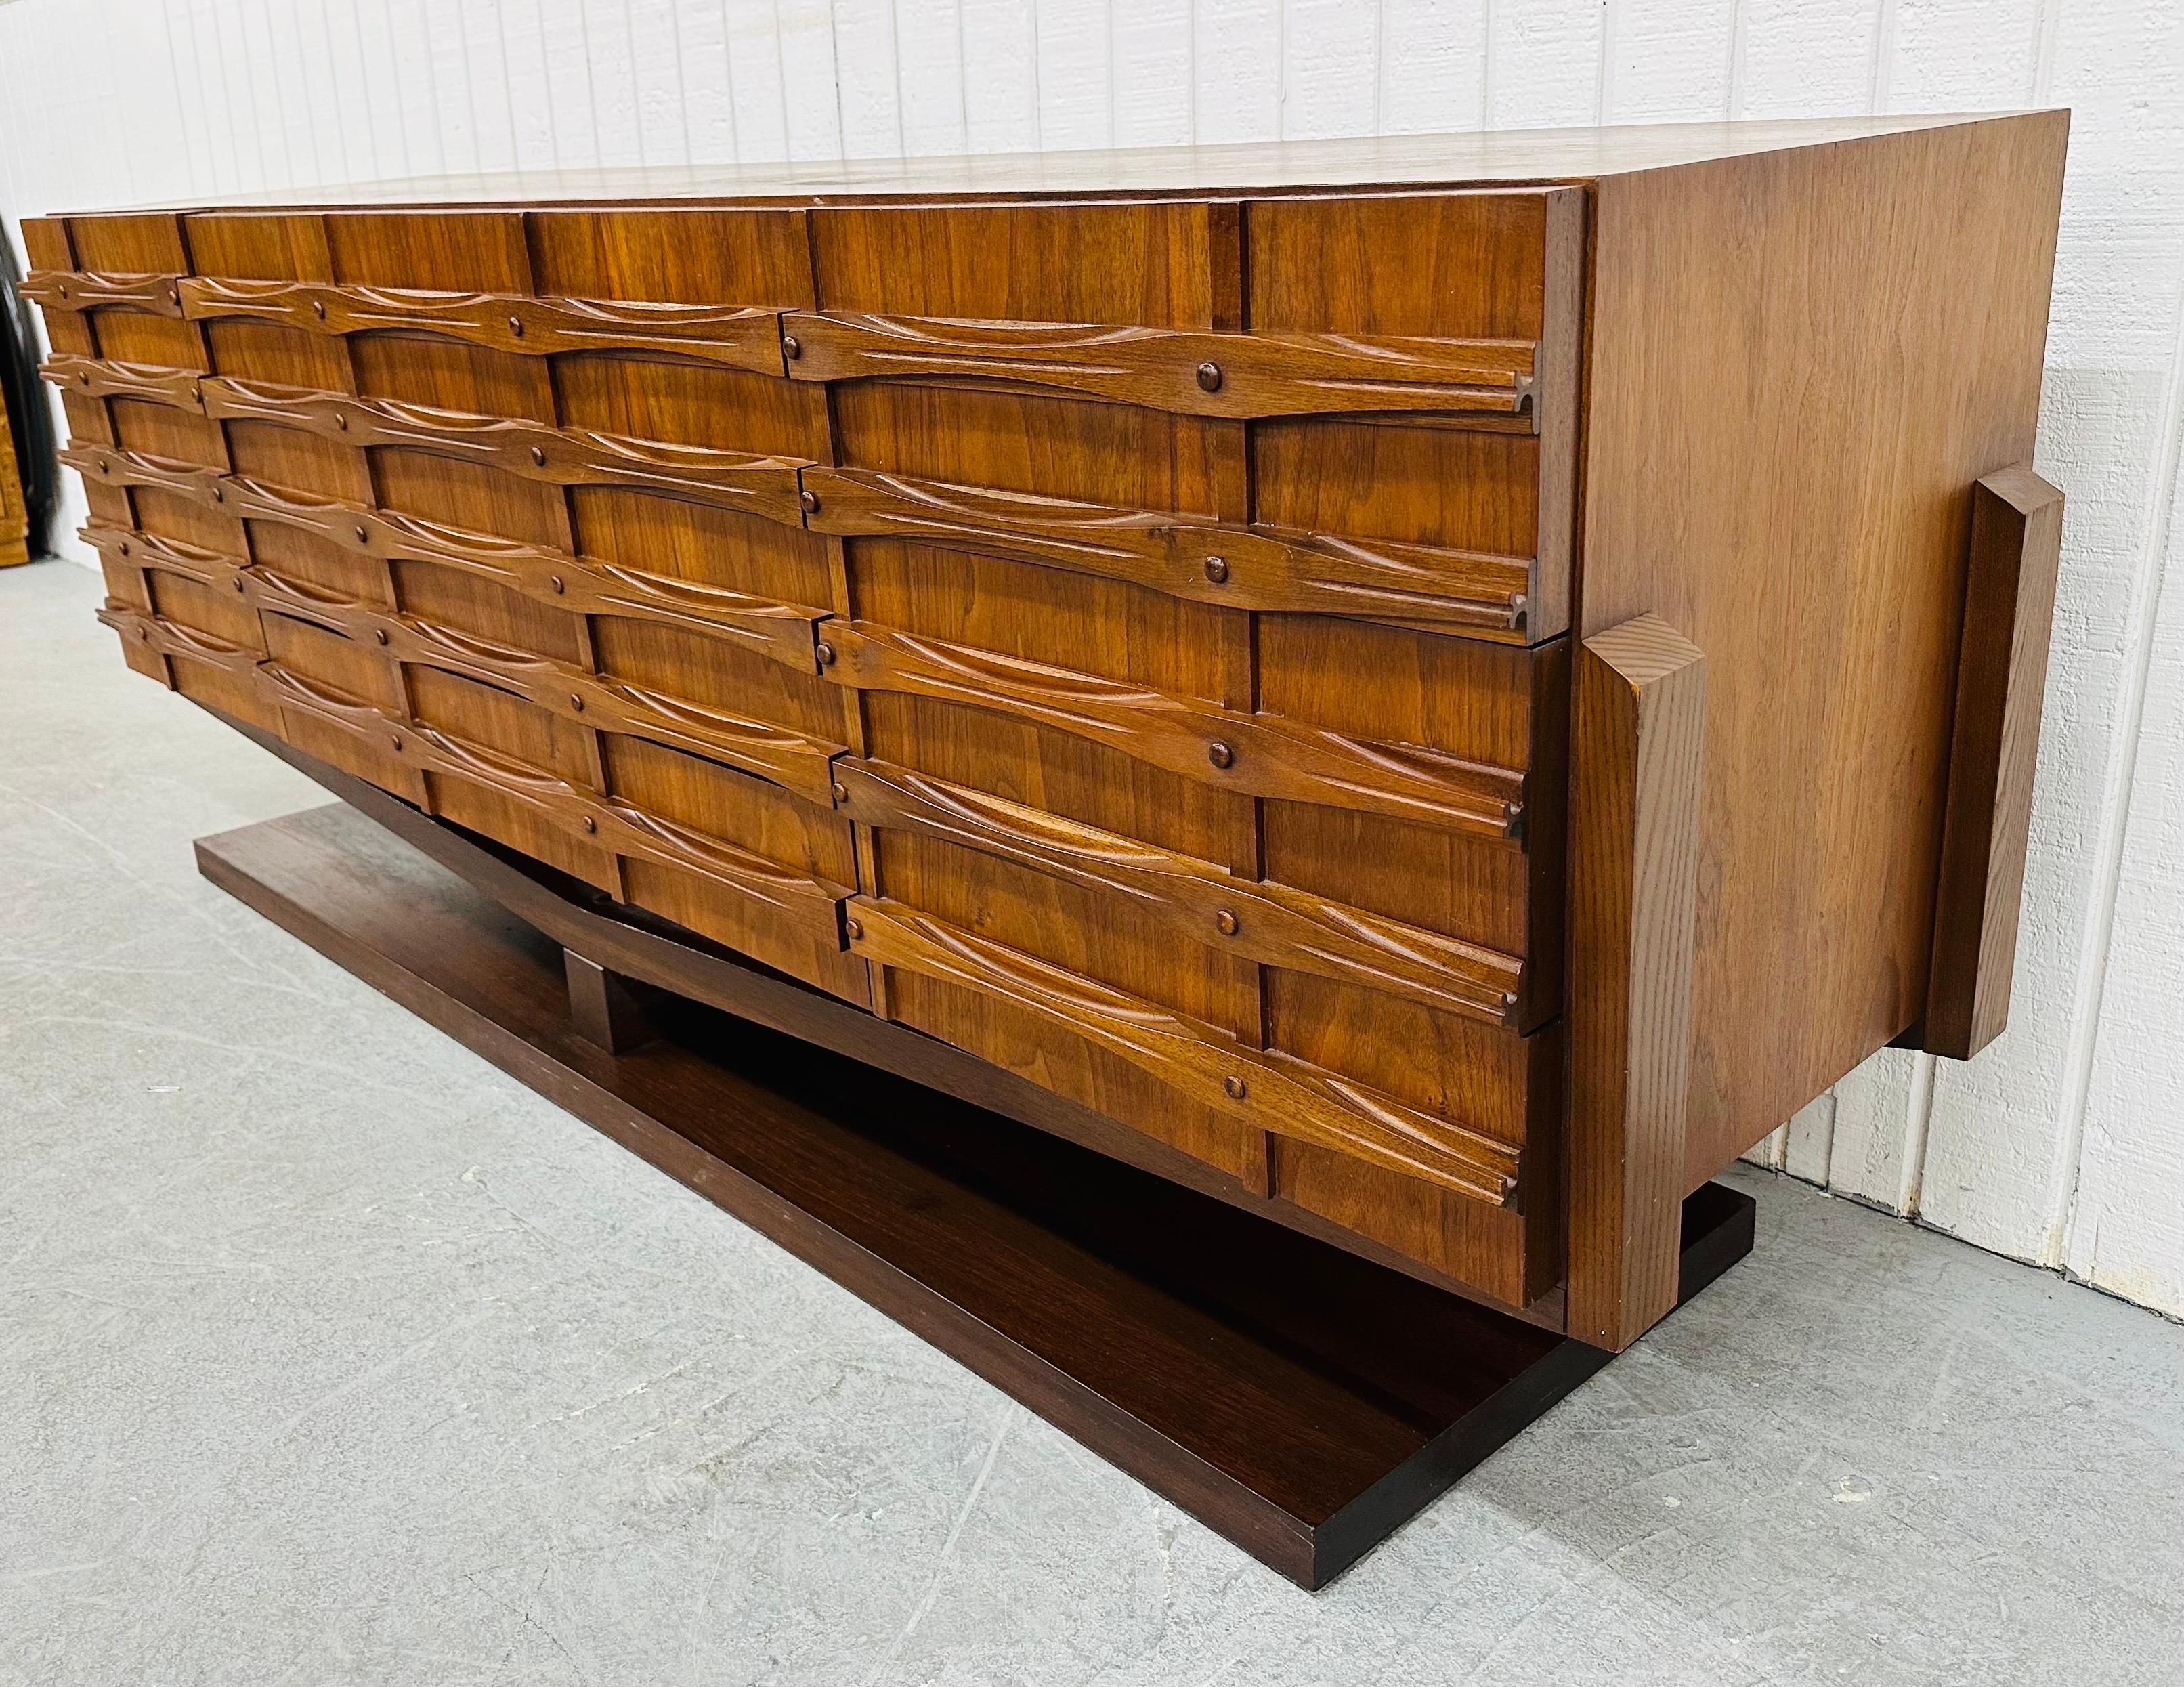 This listing is for a Mid-Century Modern Brutalist 9-Drawer Dresser. Featuring a straight line design, nine drawers with brutalist fronts, wooden pedestal base, and a beautiful walnut finish. This is an exceptional combination of quality and design!